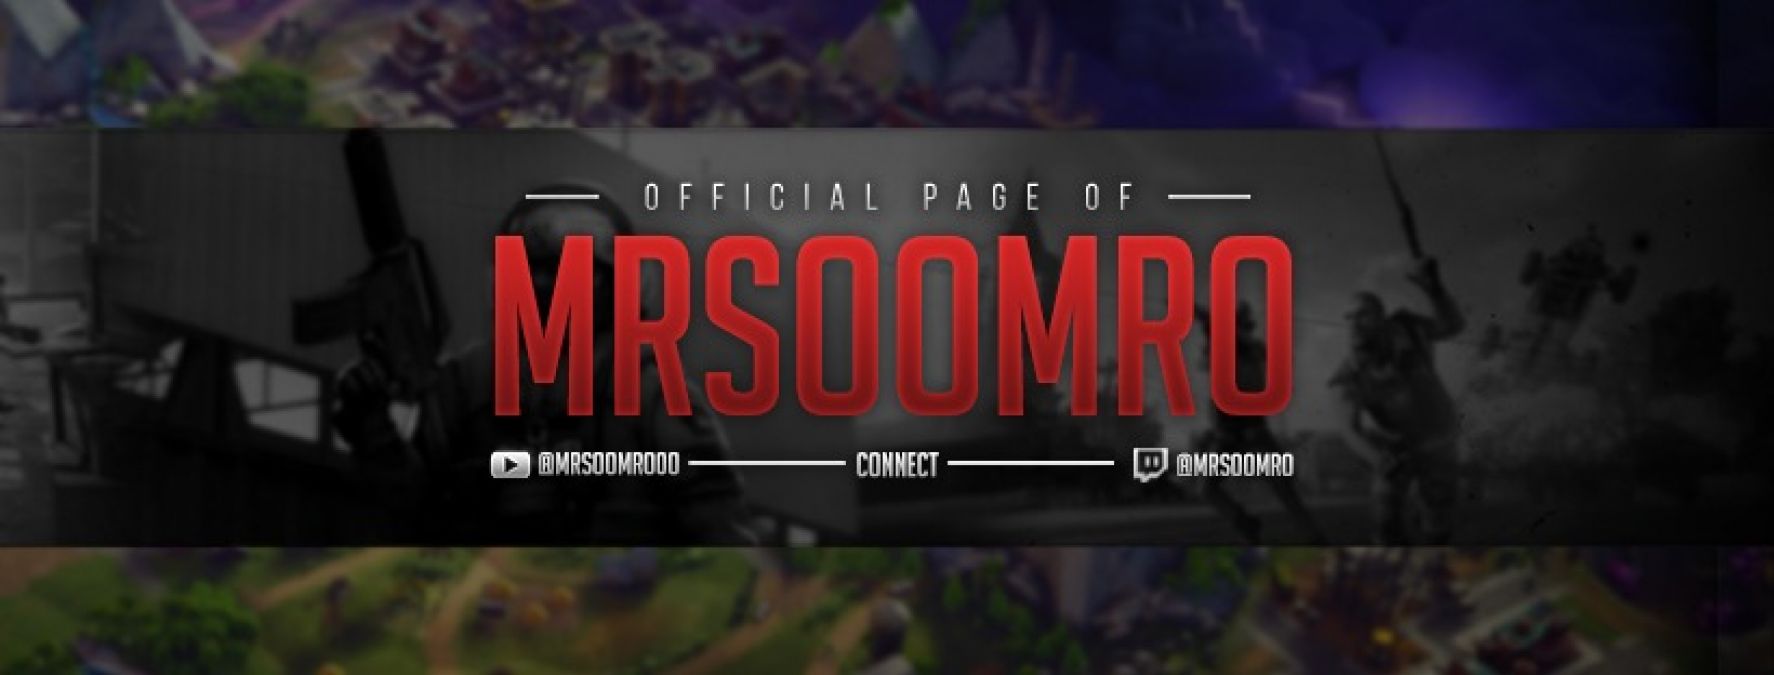 Meet Atiq Ahmed a.k.a MrSoomro: An upcoming rising gaming influencer, streamer, and competitive e-sports player.